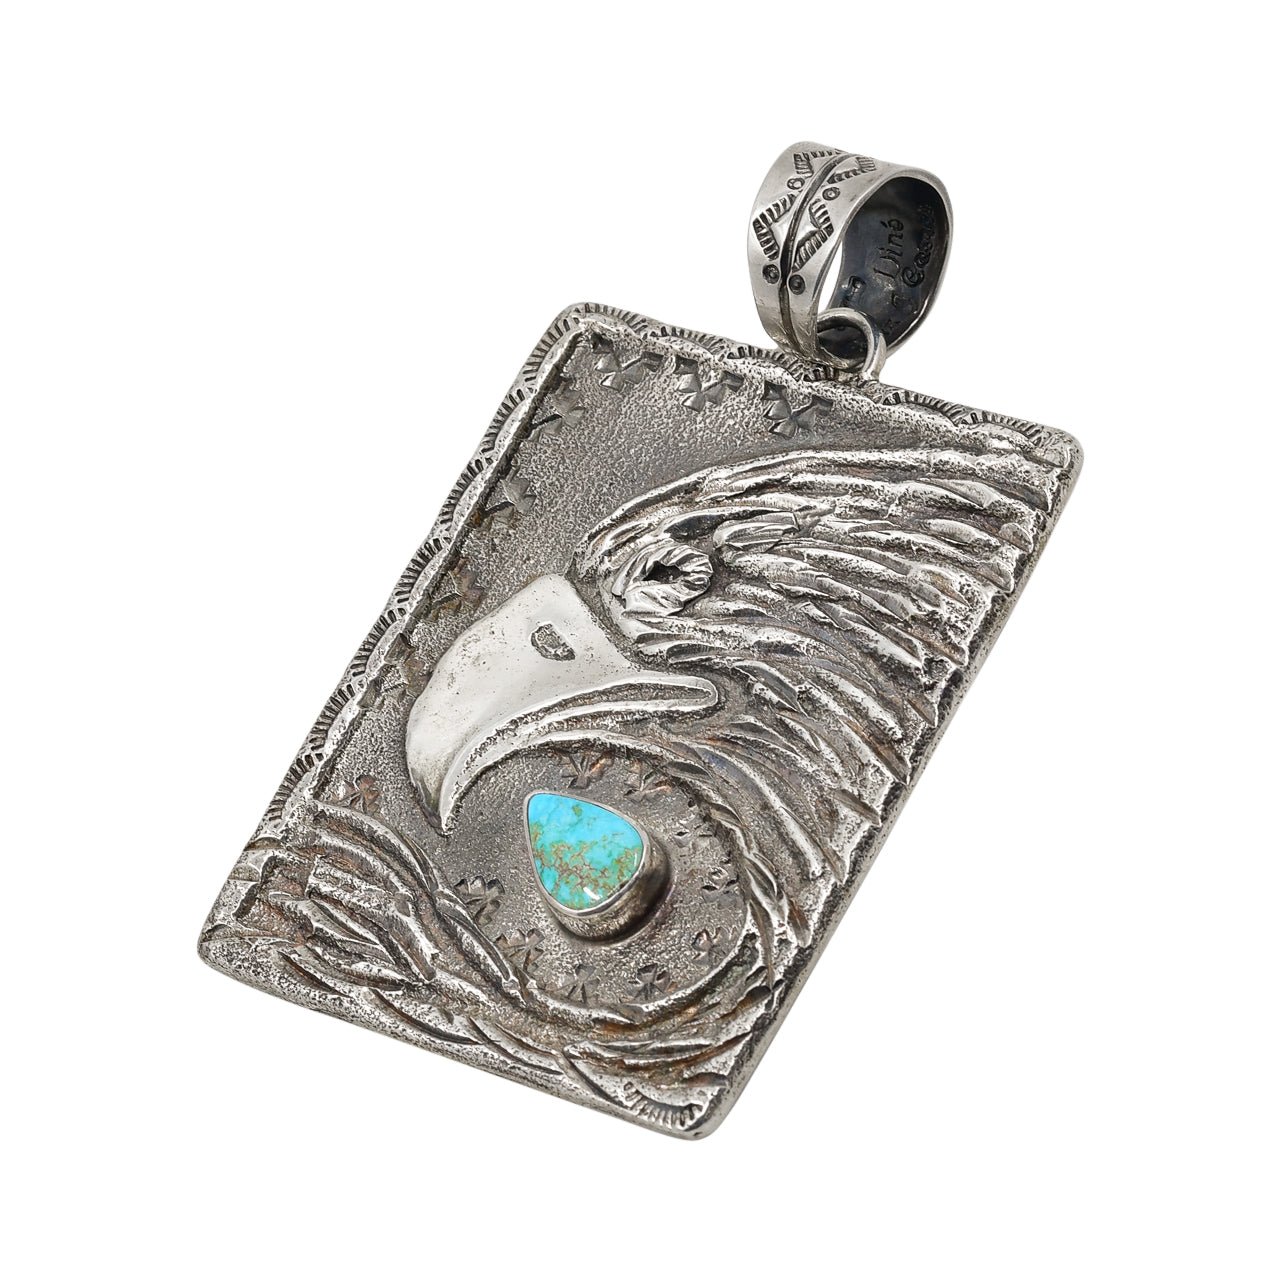 Original Handmade Fritz Casuse Pendant of Heavy Silver Eagle With Turquoise Accent - Turquoise & Tufa